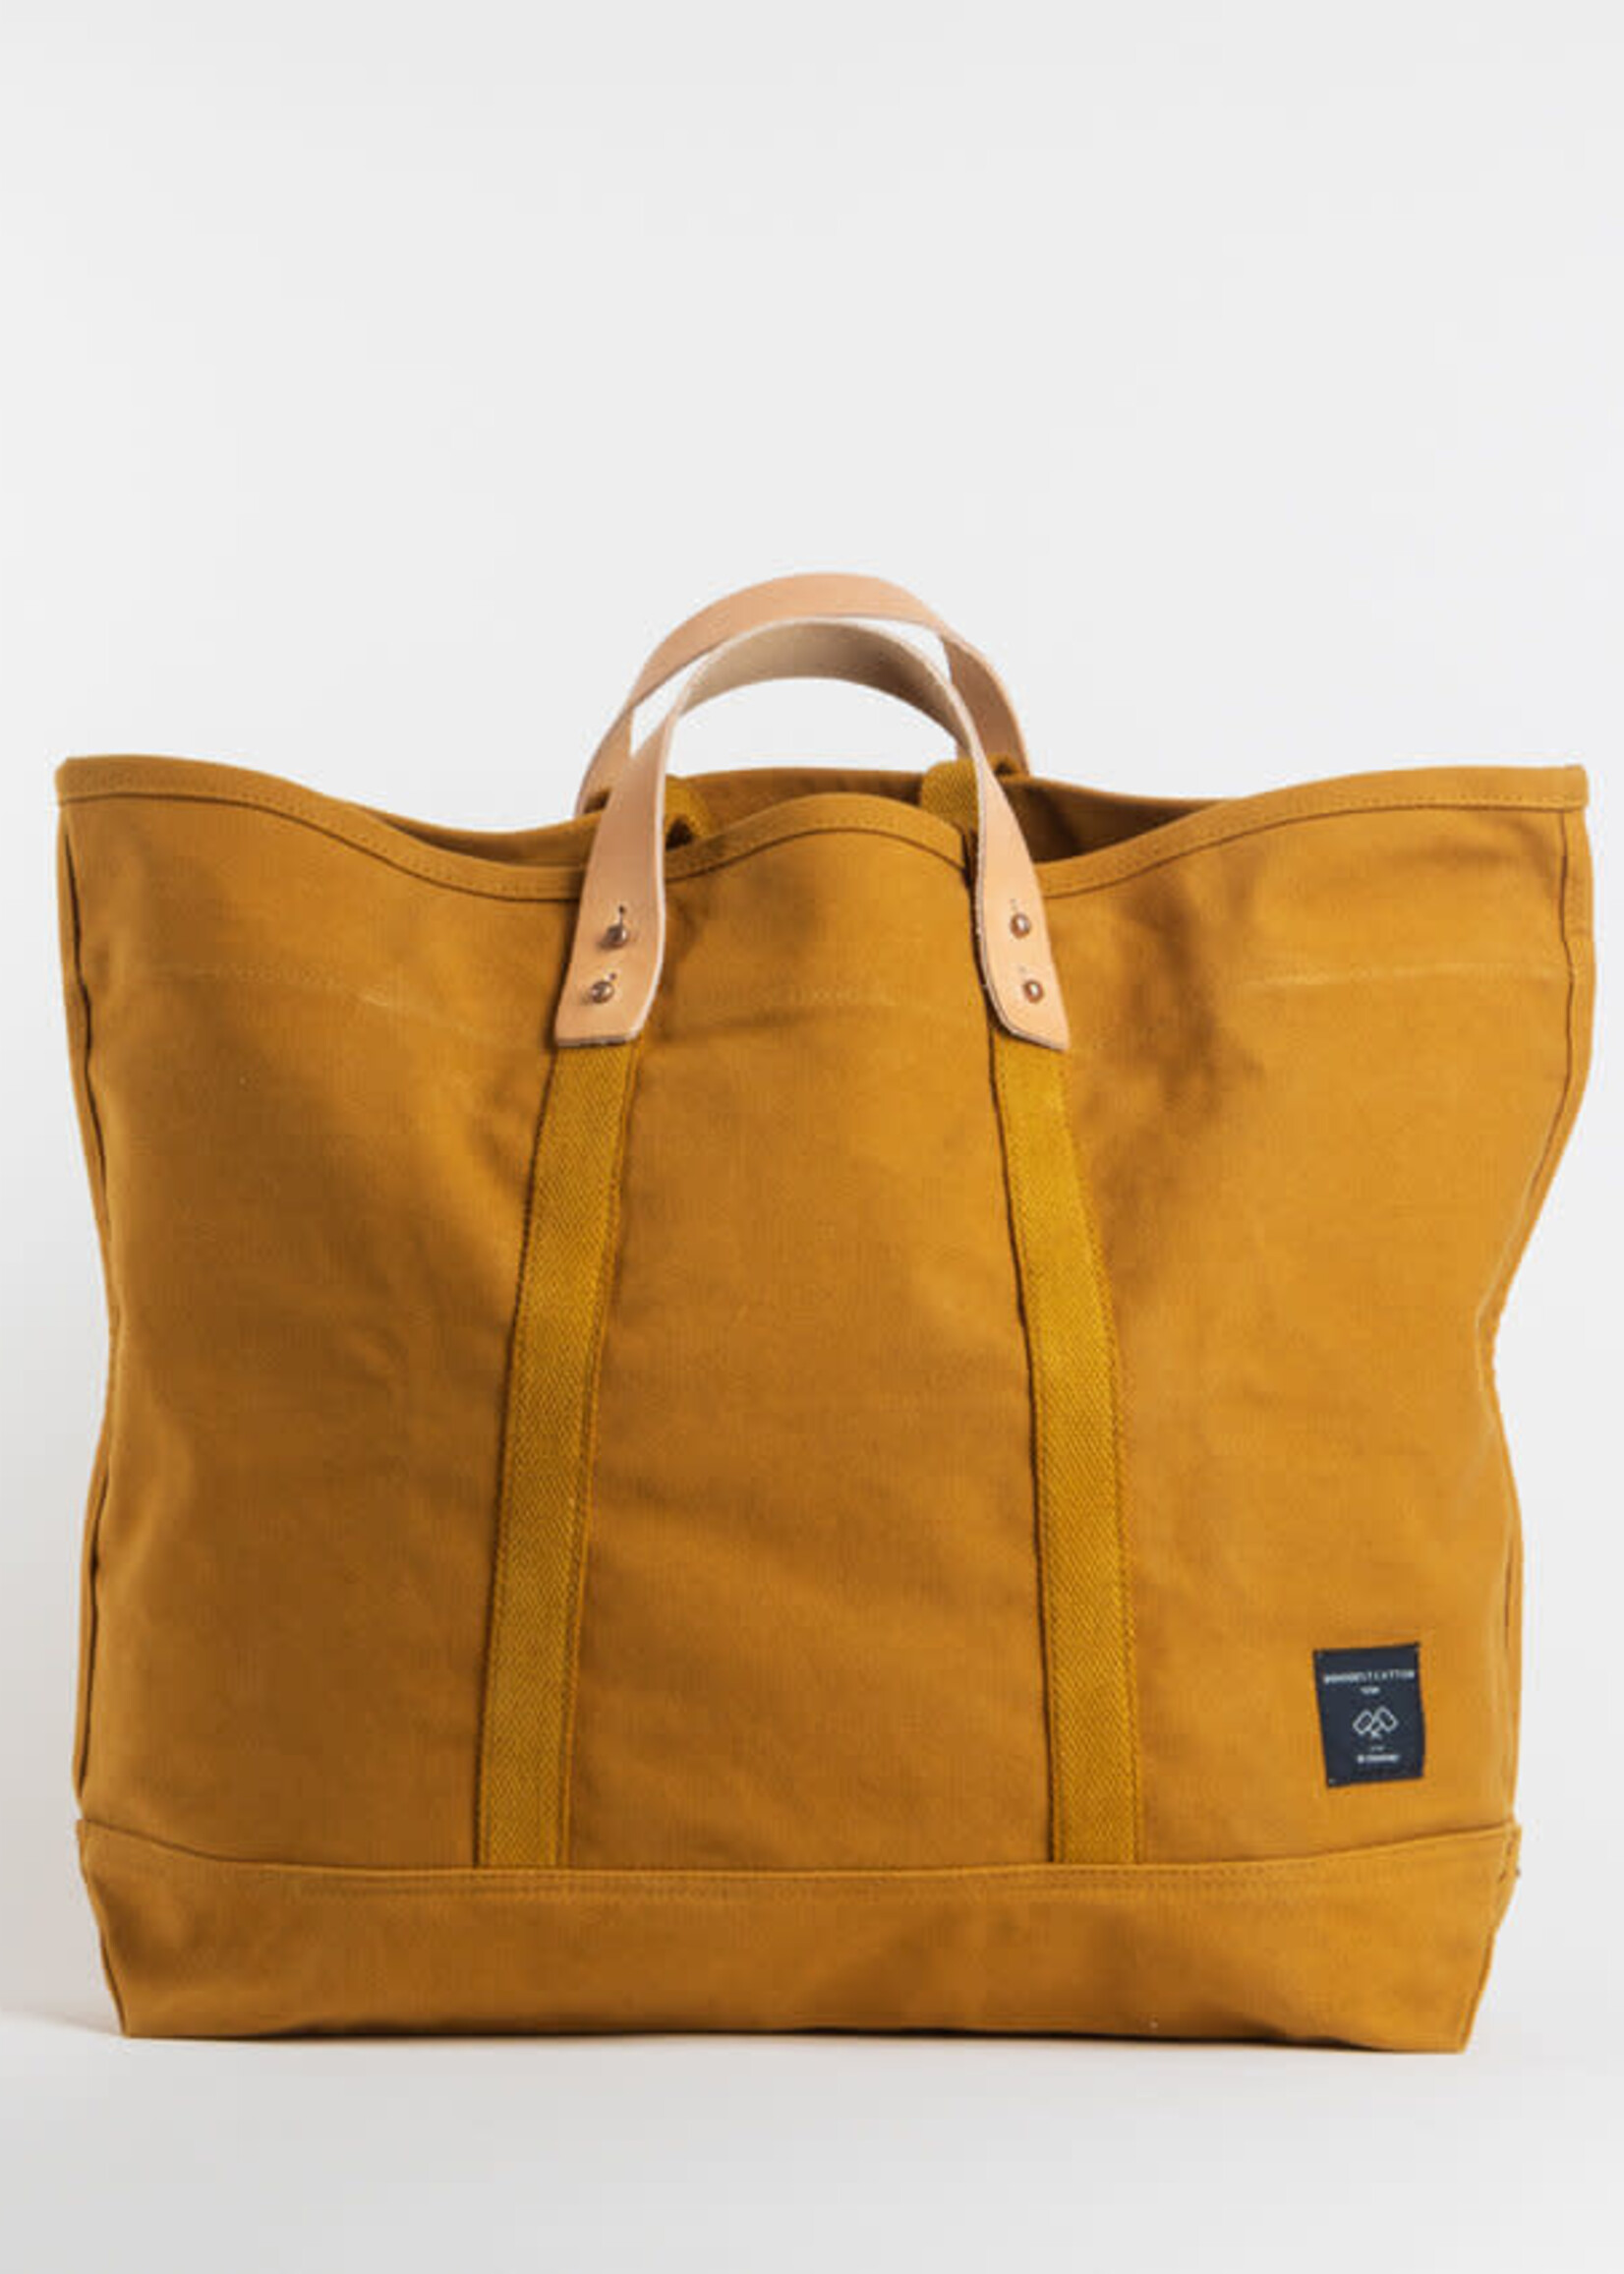 Shira Entis Large East West Tote